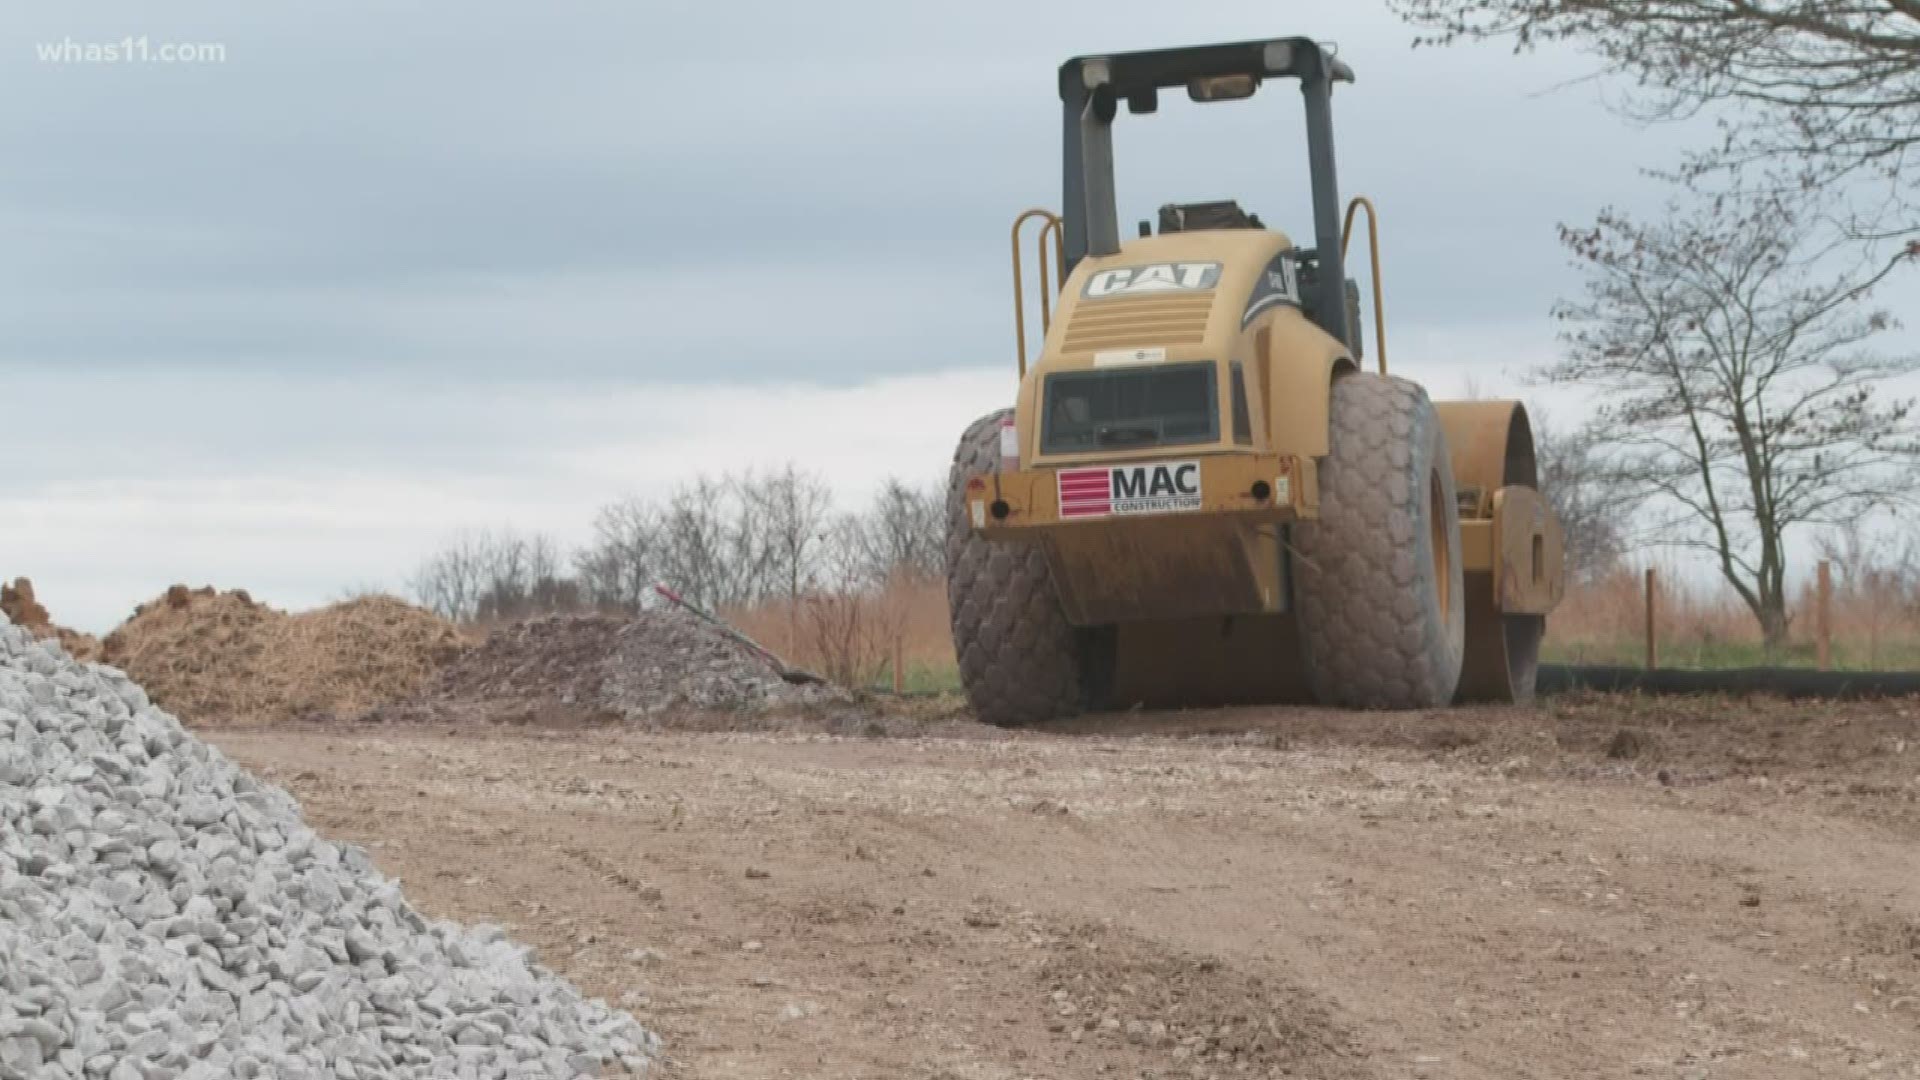 The first phase of work has kicked off in Georgetown, Indiana for a new technology campus